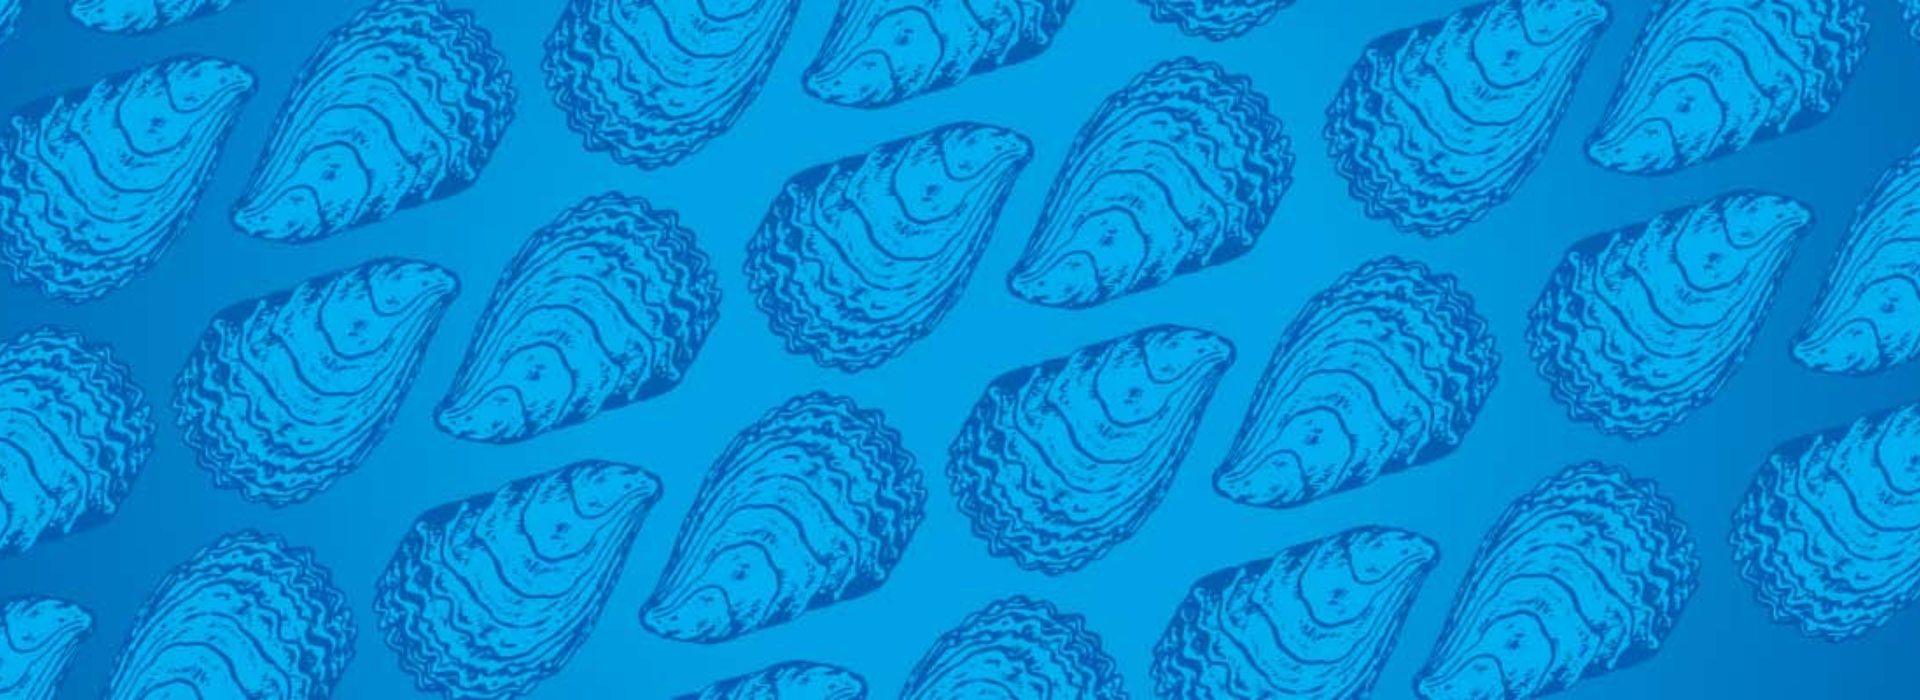 Blue gradient background with oysters 